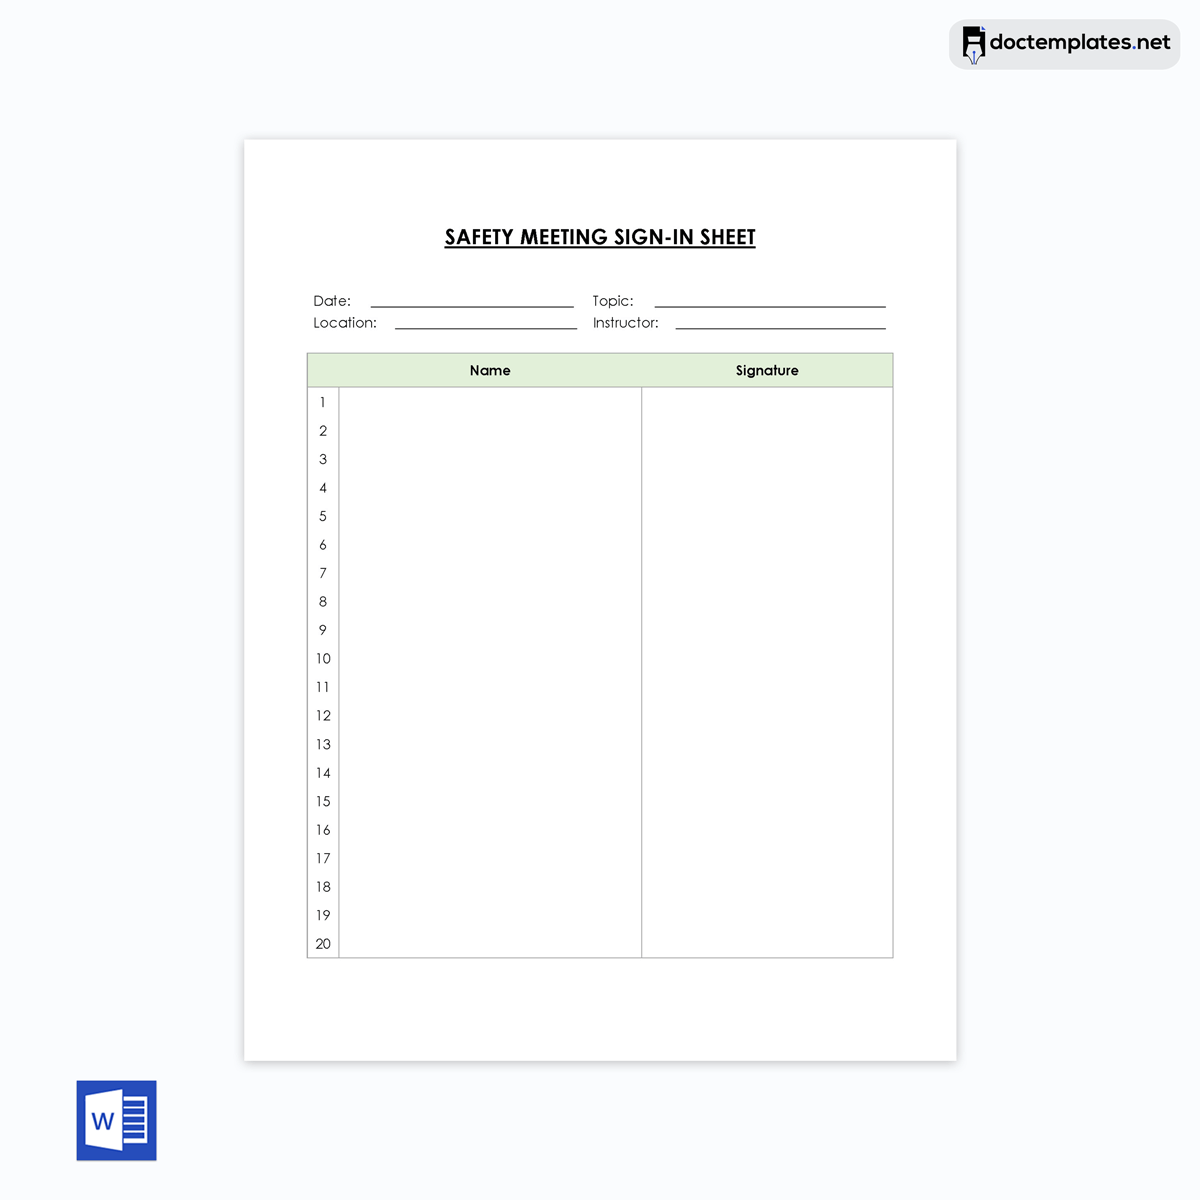 Sign-in sheet template Word 